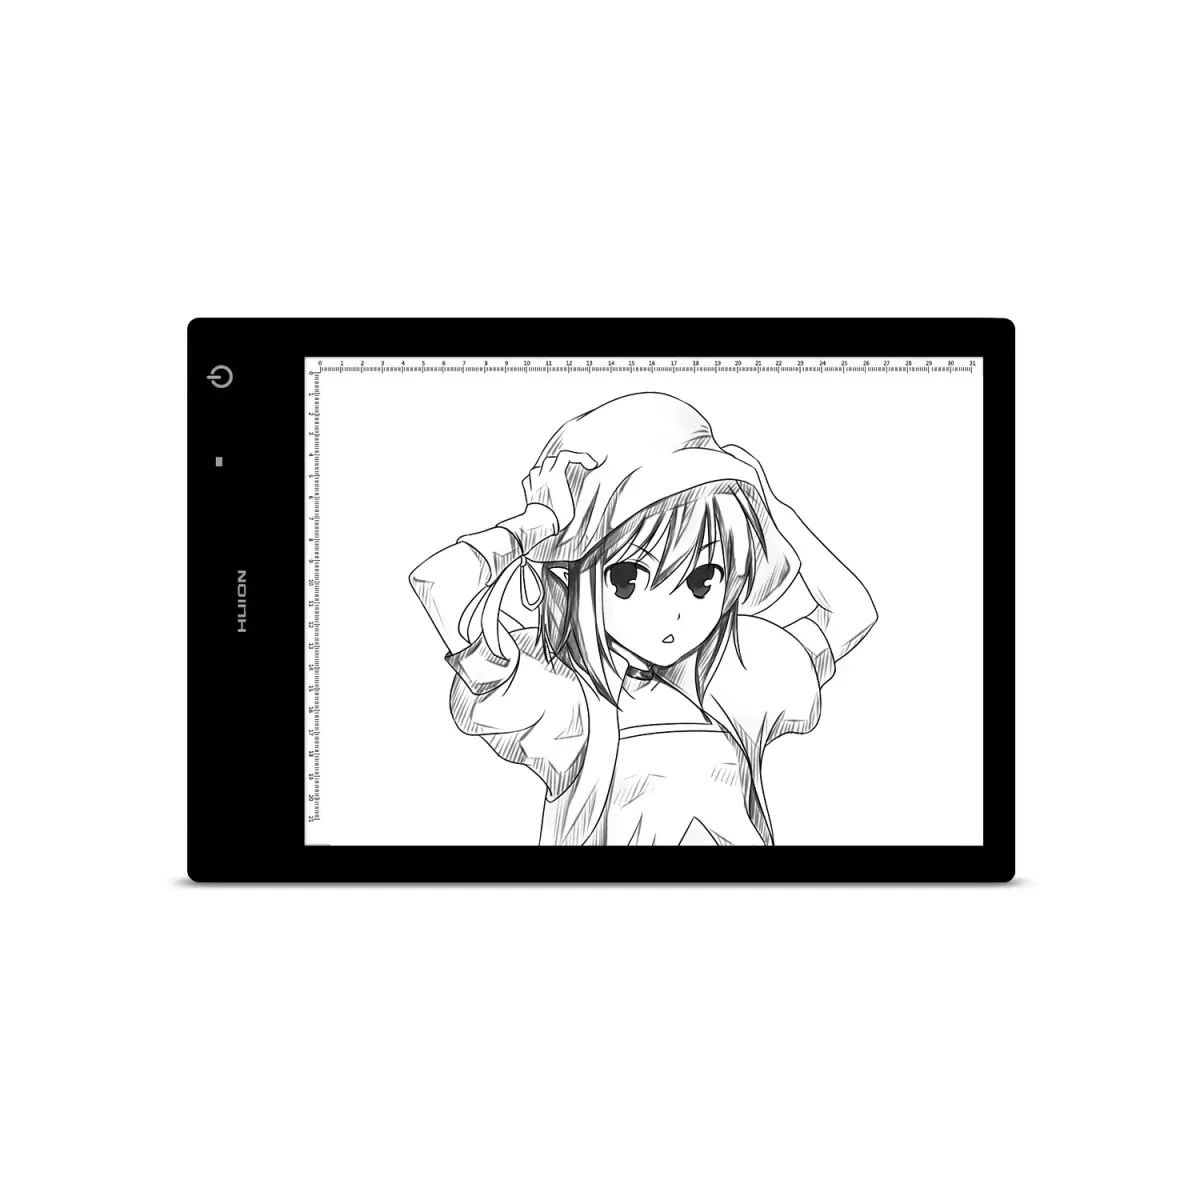 Huion LB4 Portable A4 Size LED Light Pad  Huion Official Store: Drawing  Tablets, Pen Tablets, Pen Display, Led Light Pad